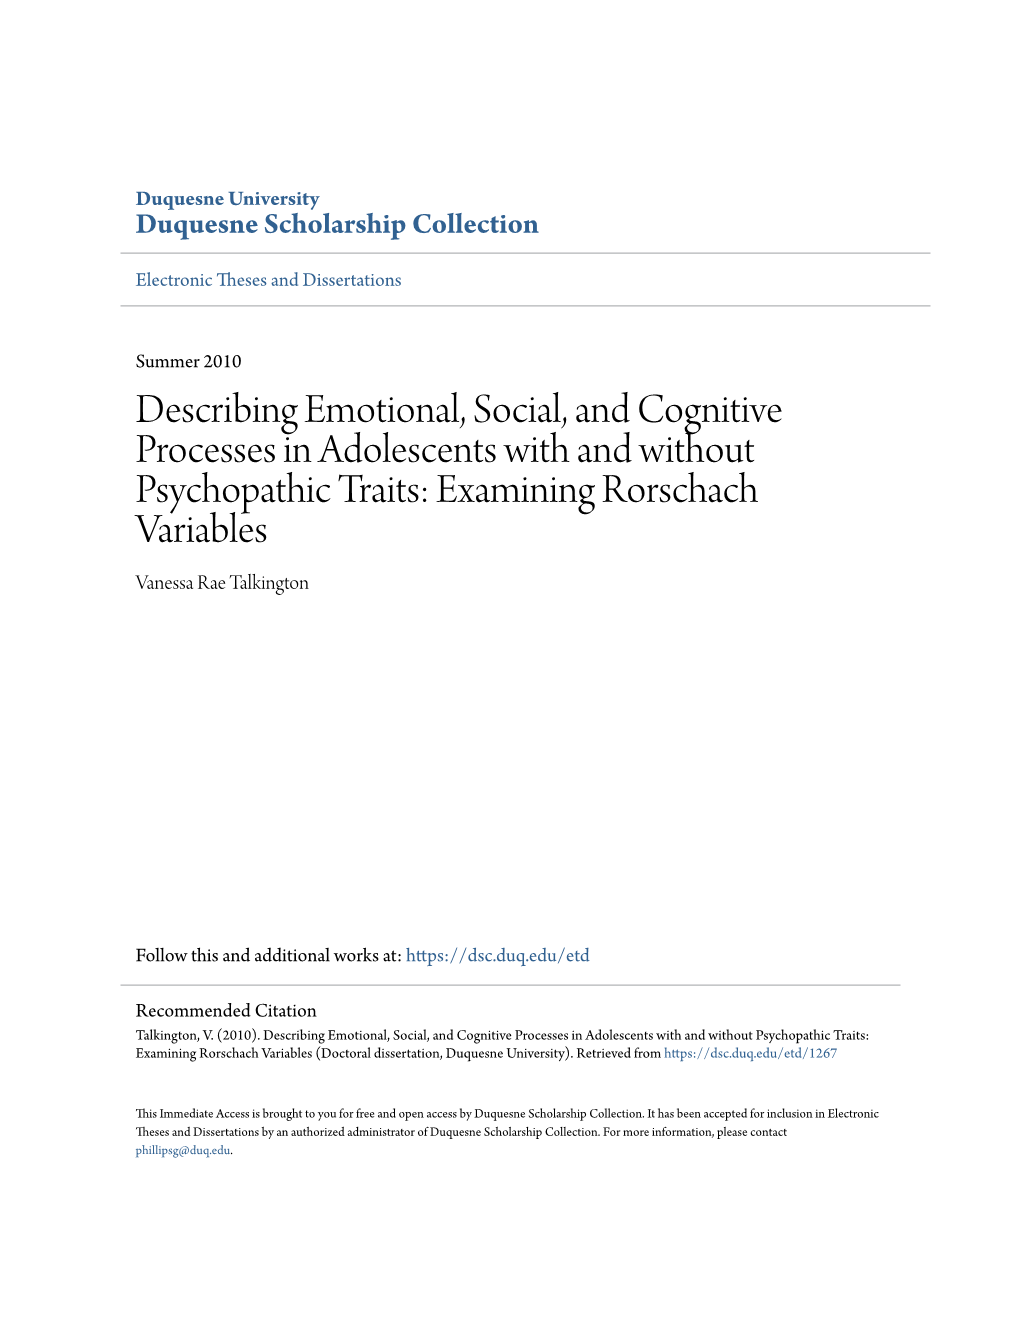 Describing Emotional, Social, and Cognitive Processes in Adolescents with and Without Psychopathic Traits: Examining Rorschach Variables Vanessa Rae Talkington